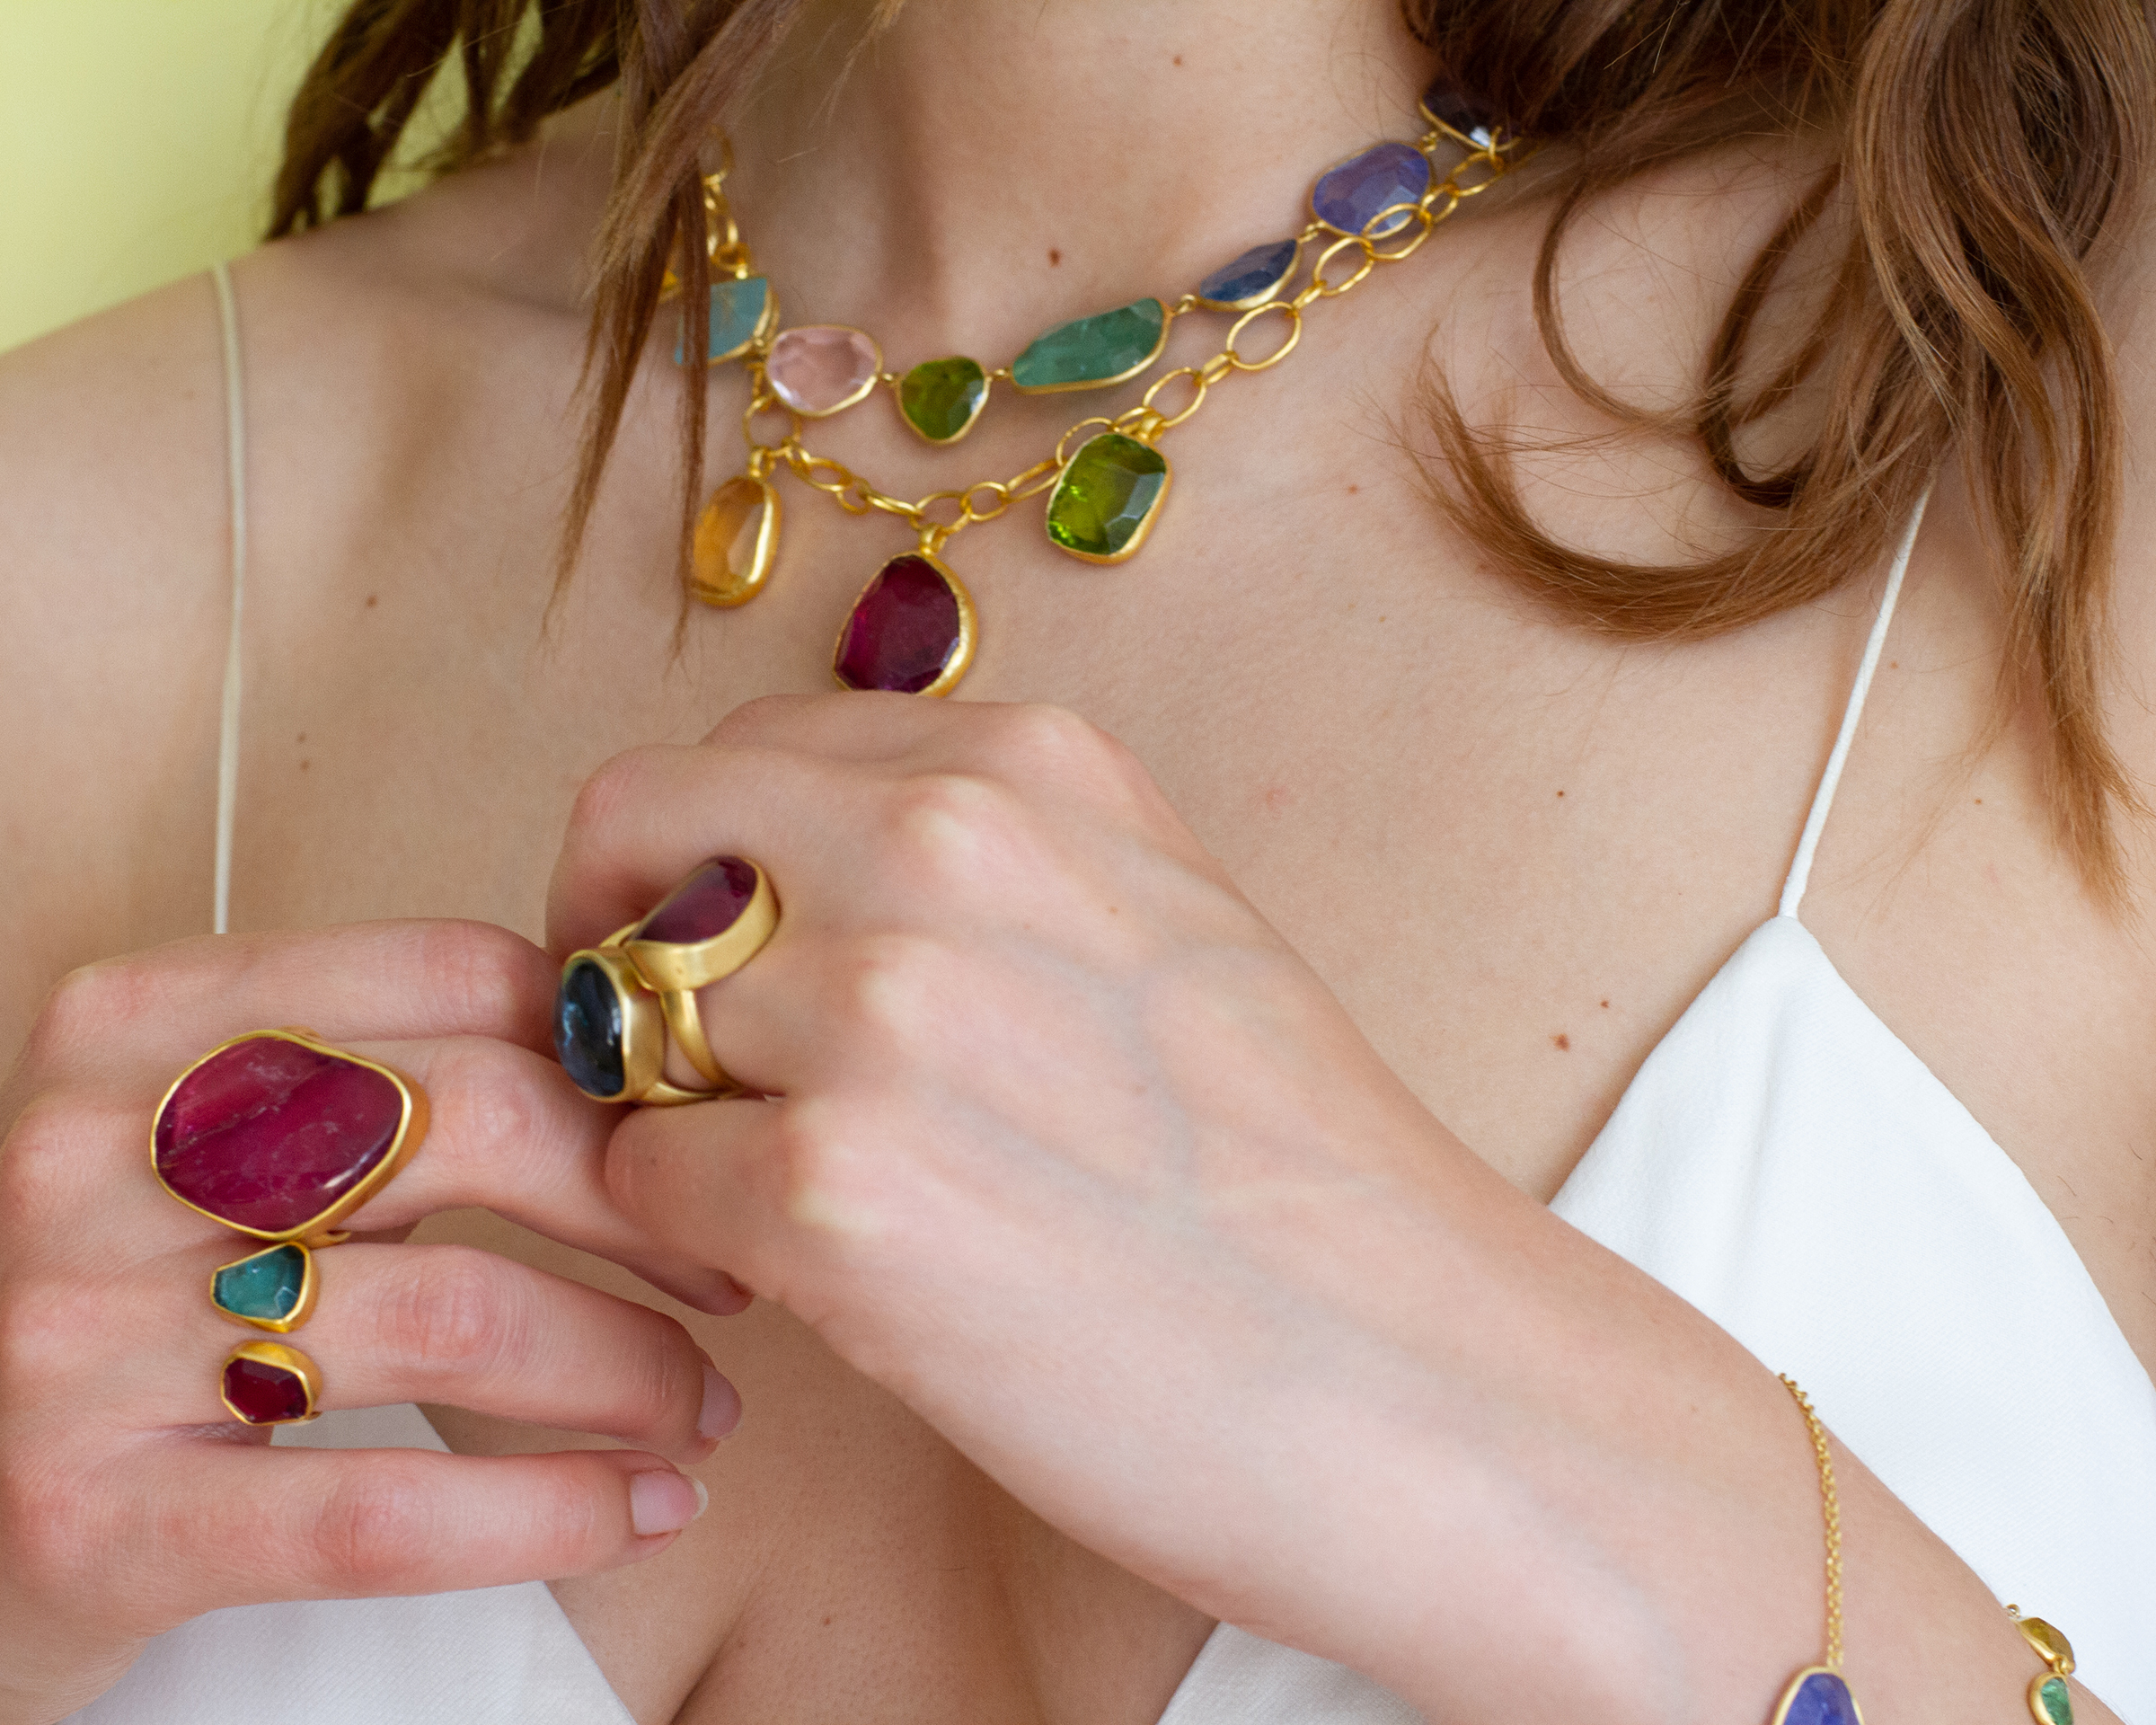 Pippa Small’s Ethical Jewelry Brand